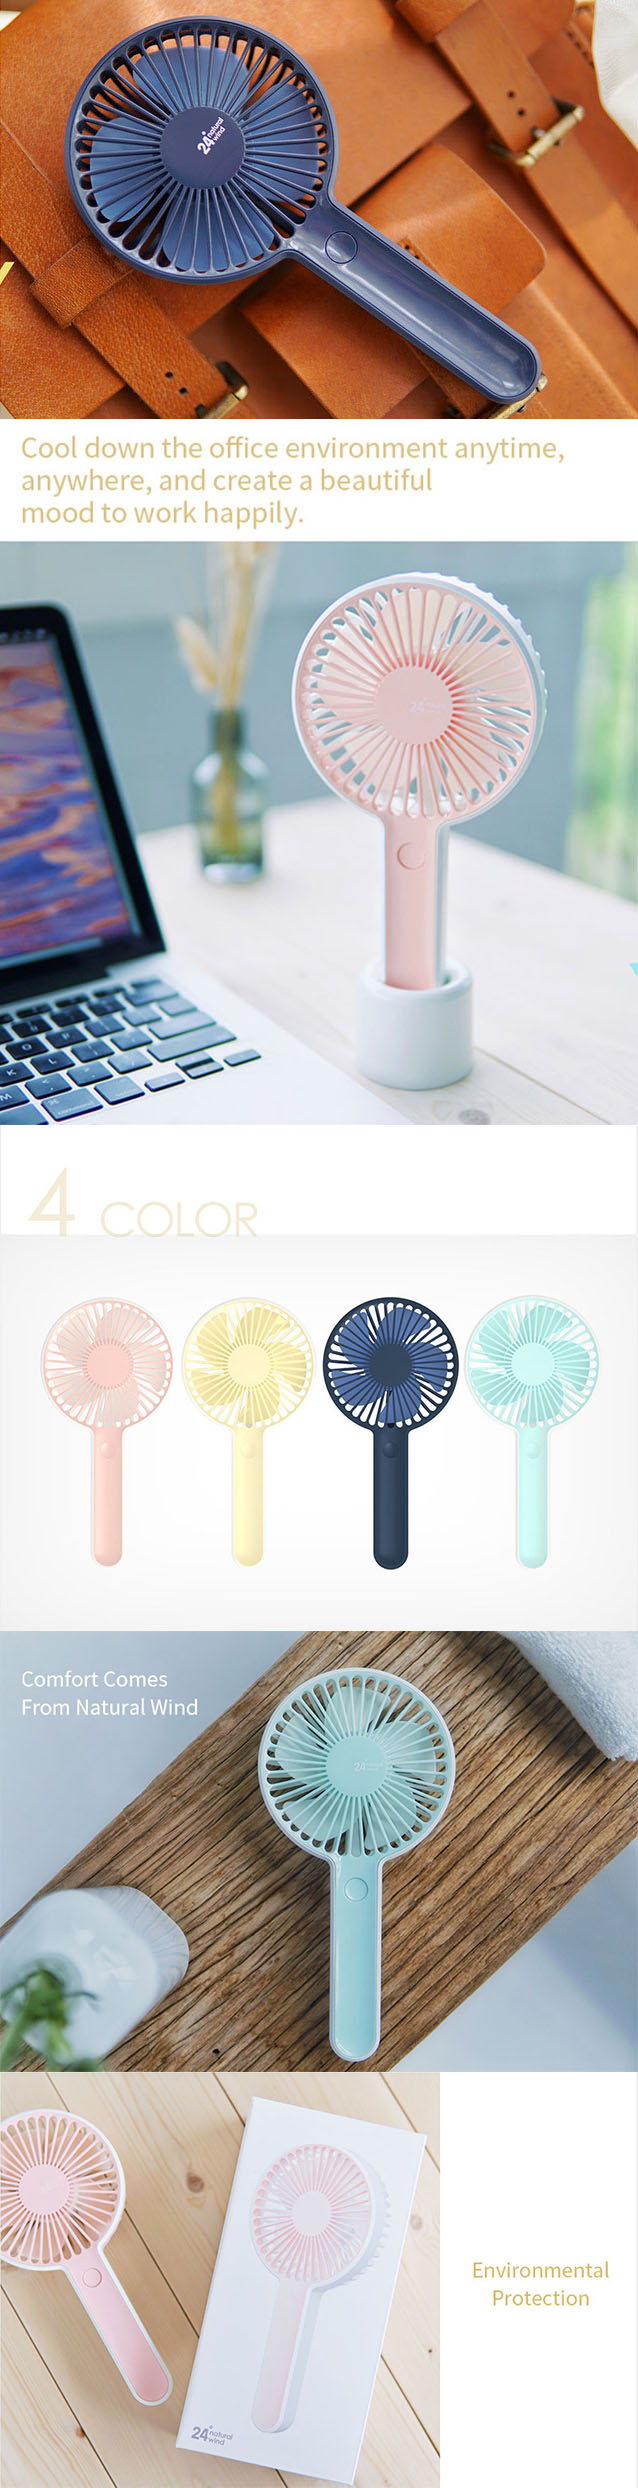 3Life-311-USB-Rechargeable-Portable-Mute-Mini-Fan-2000mAh-Battery-Capacity-165g-Low-Noise-Natural-Wi-1488834-12